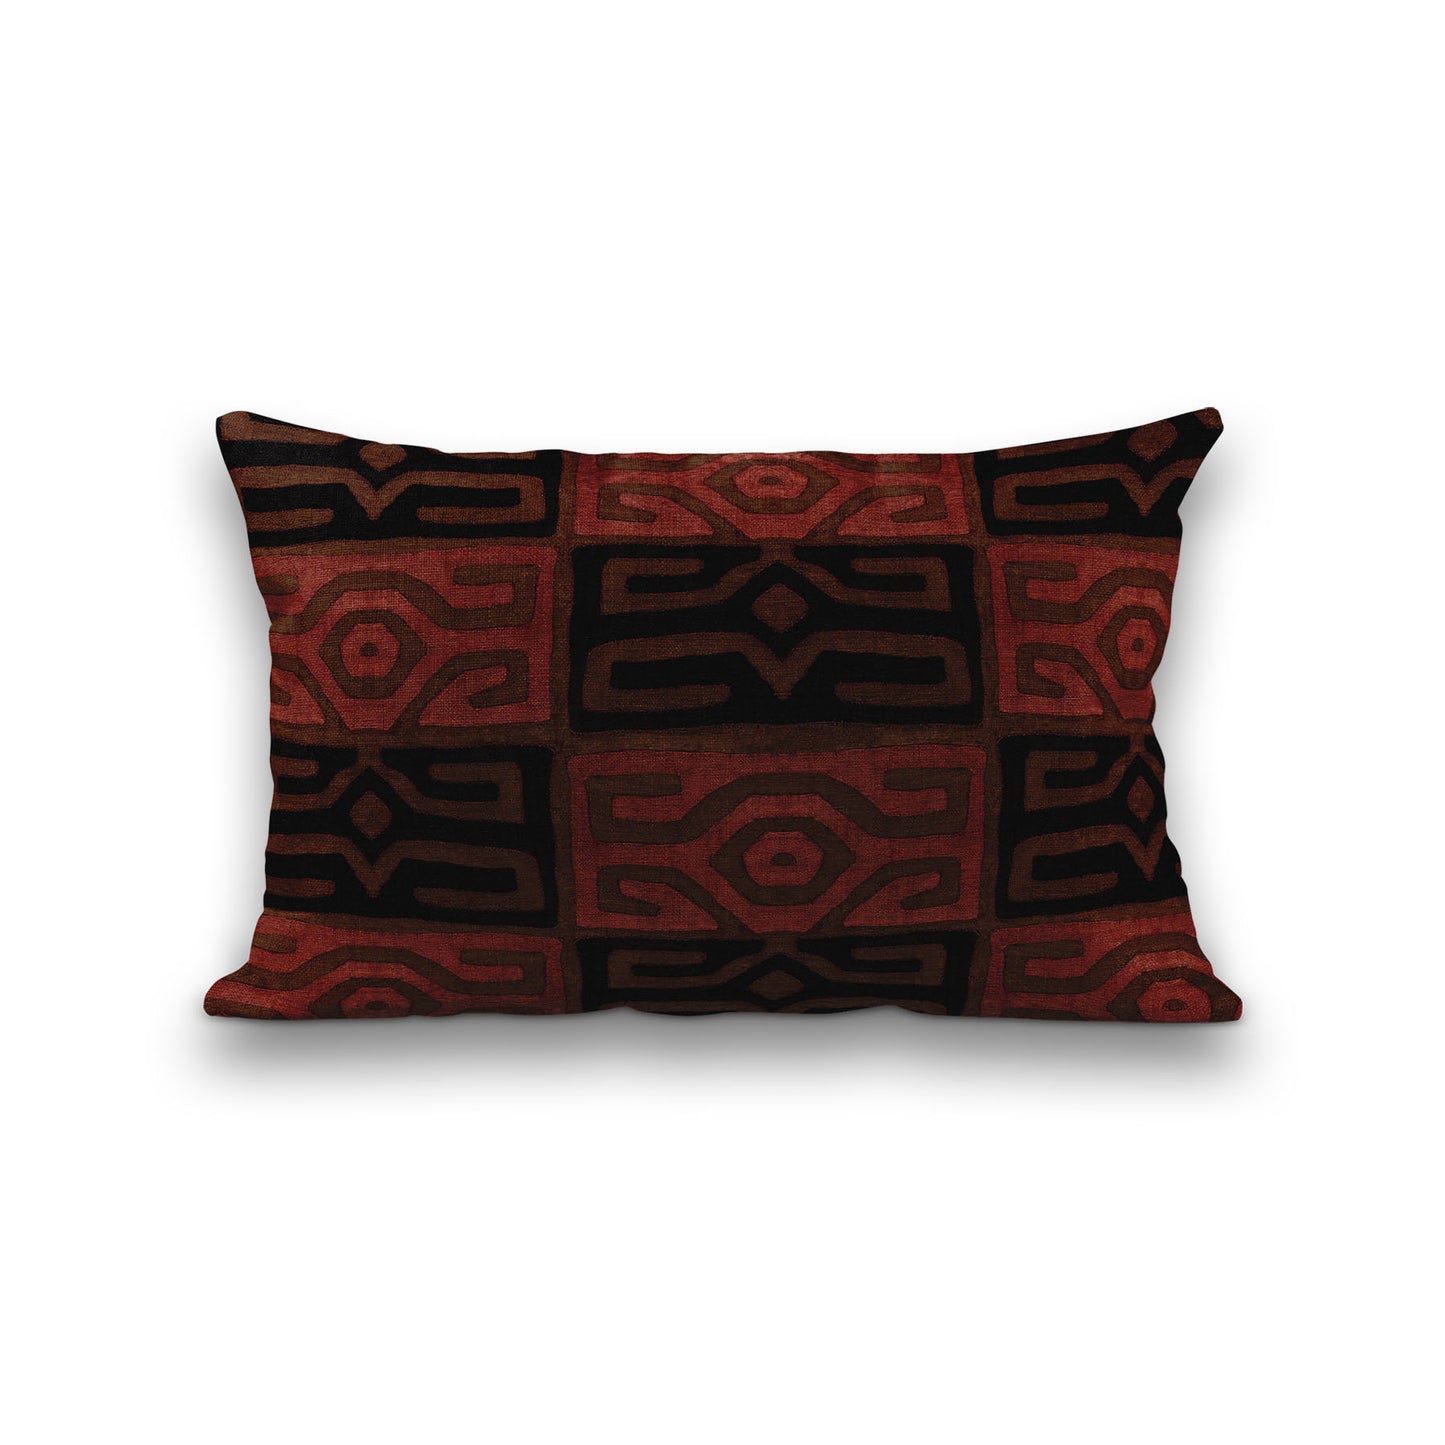 AnitaveeTextile African Kuba Cloth Pillows Print Cover and Insert - 3 Sizes